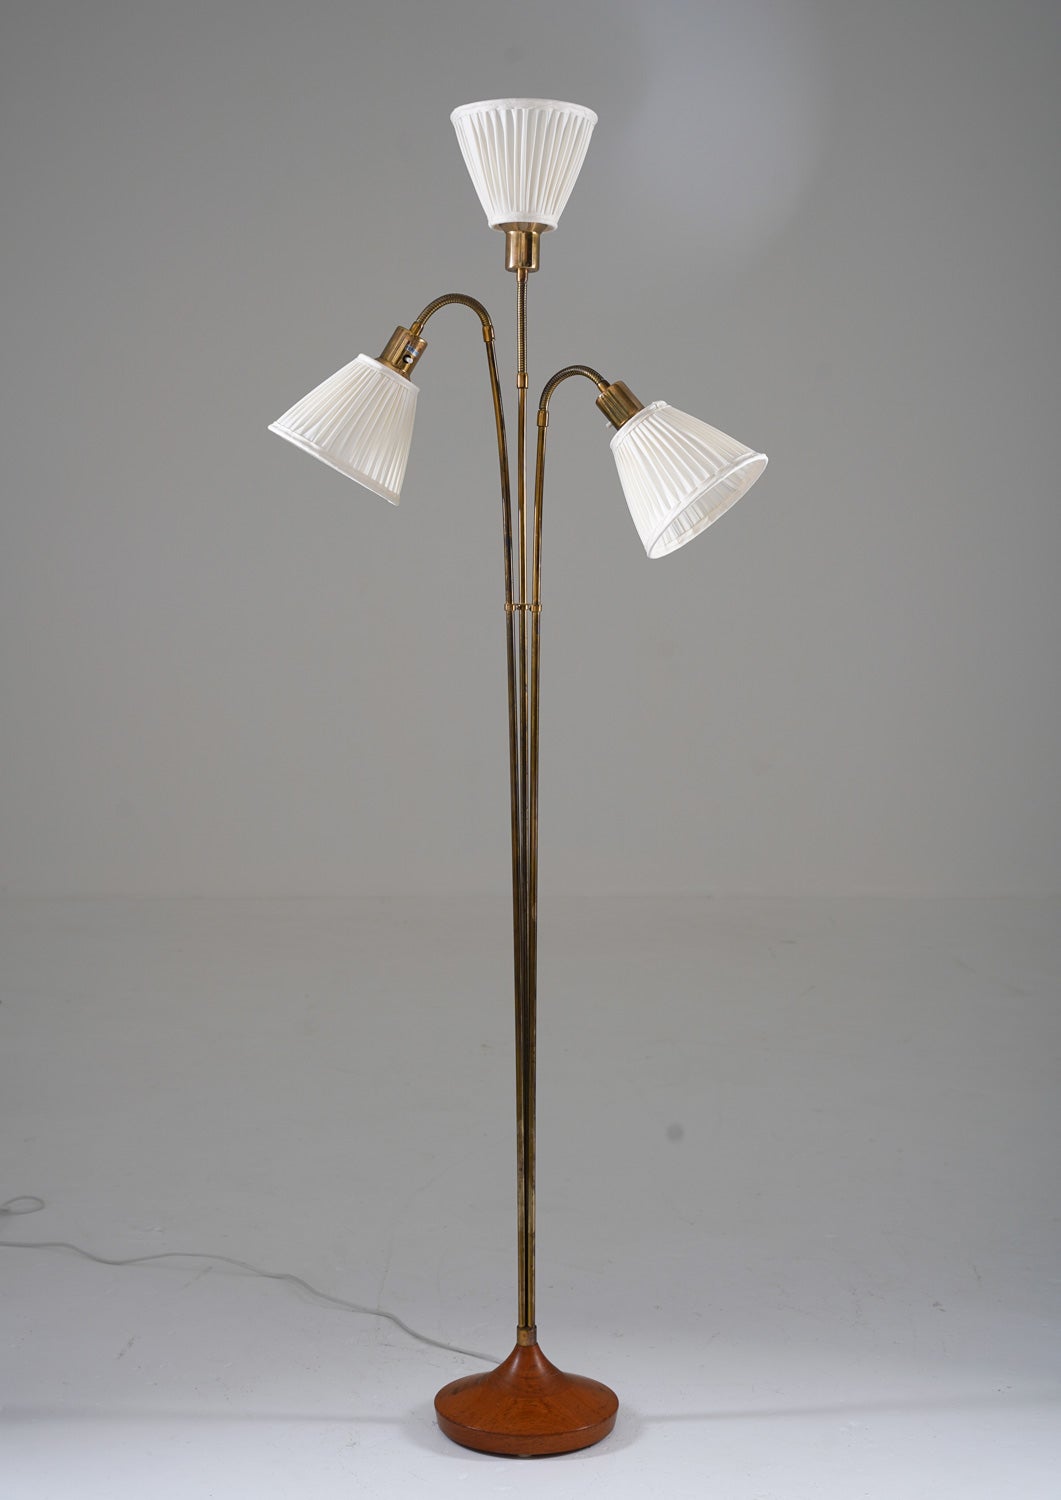 Lovely three-armed floor lamp manufactured in the 1960s. 
This lamp is made of brass with a foot in solid teak. It features three light sources, hidden behind new hand-pleated chintz fabric shades, held by adjustable arms.

Condition: Very good